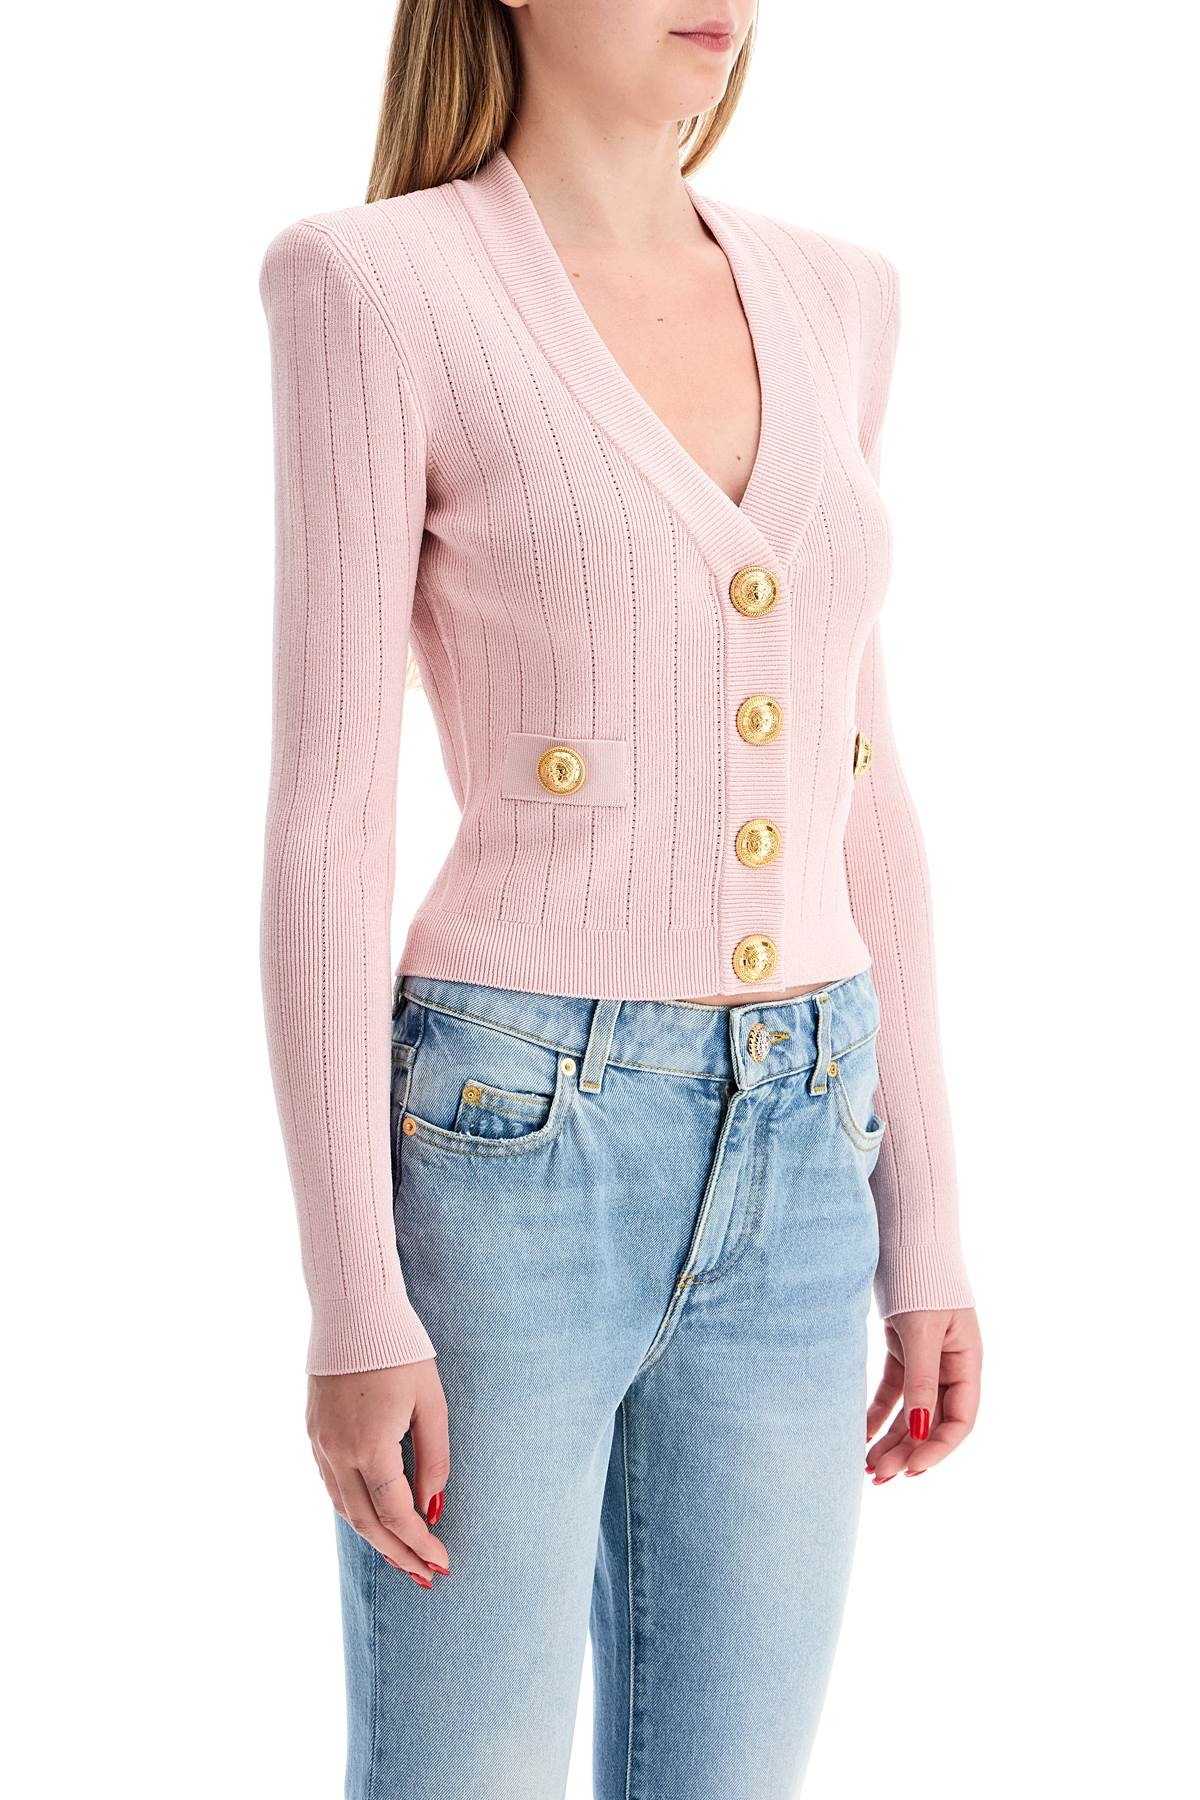 Balmain Cardigan With Structured Shoulders - 3